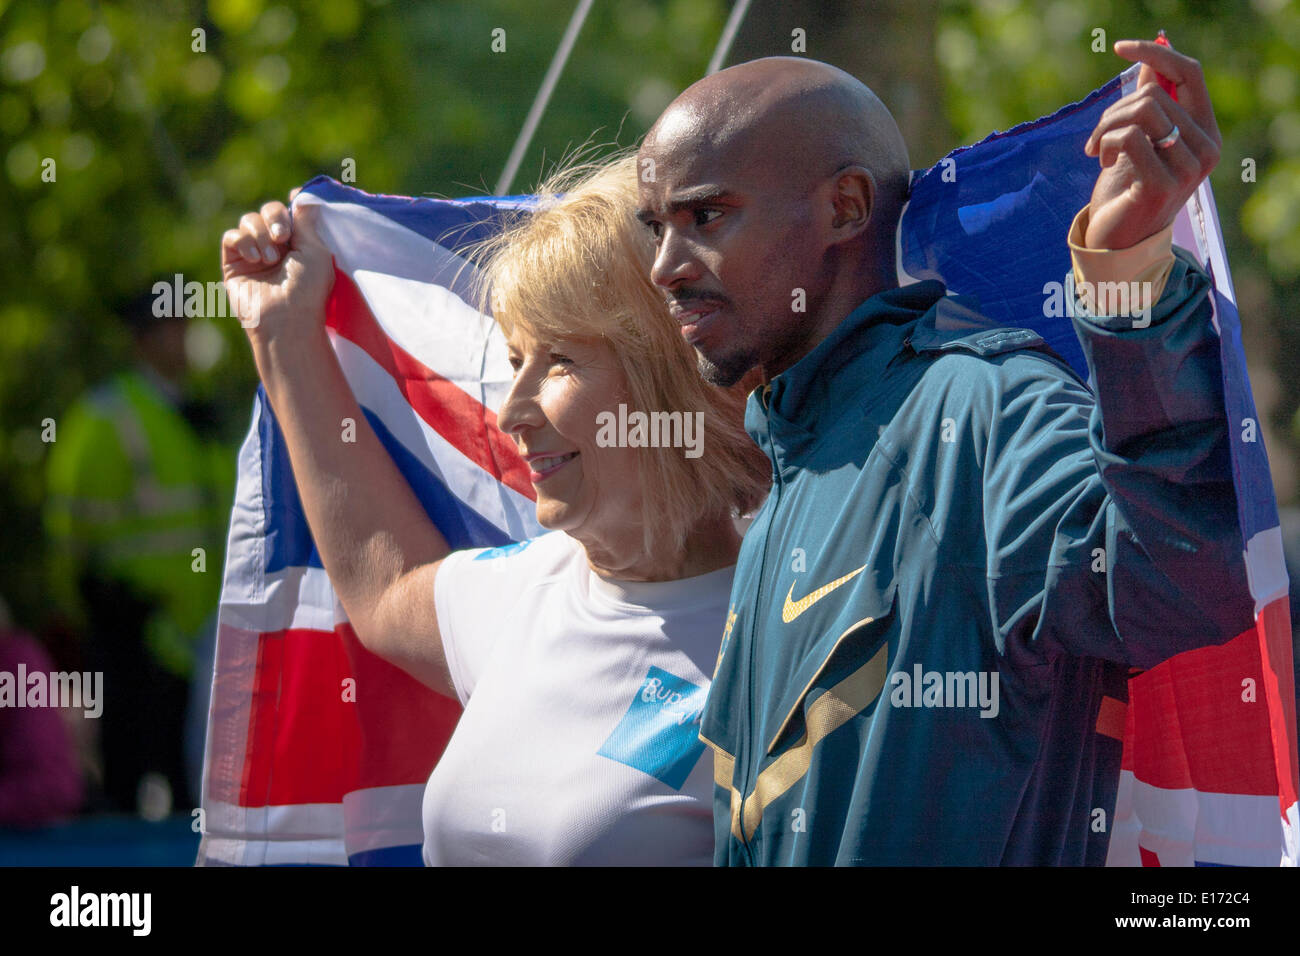 London, UK. 25th May, 2014. Former BBC Royal Correspondent Jenny Bond and Olympic long distance medalist Mo Farrah pose at the start of the BUP 10km run in London. Credit:  Paul Davey/Alamy Live News Stock Photo